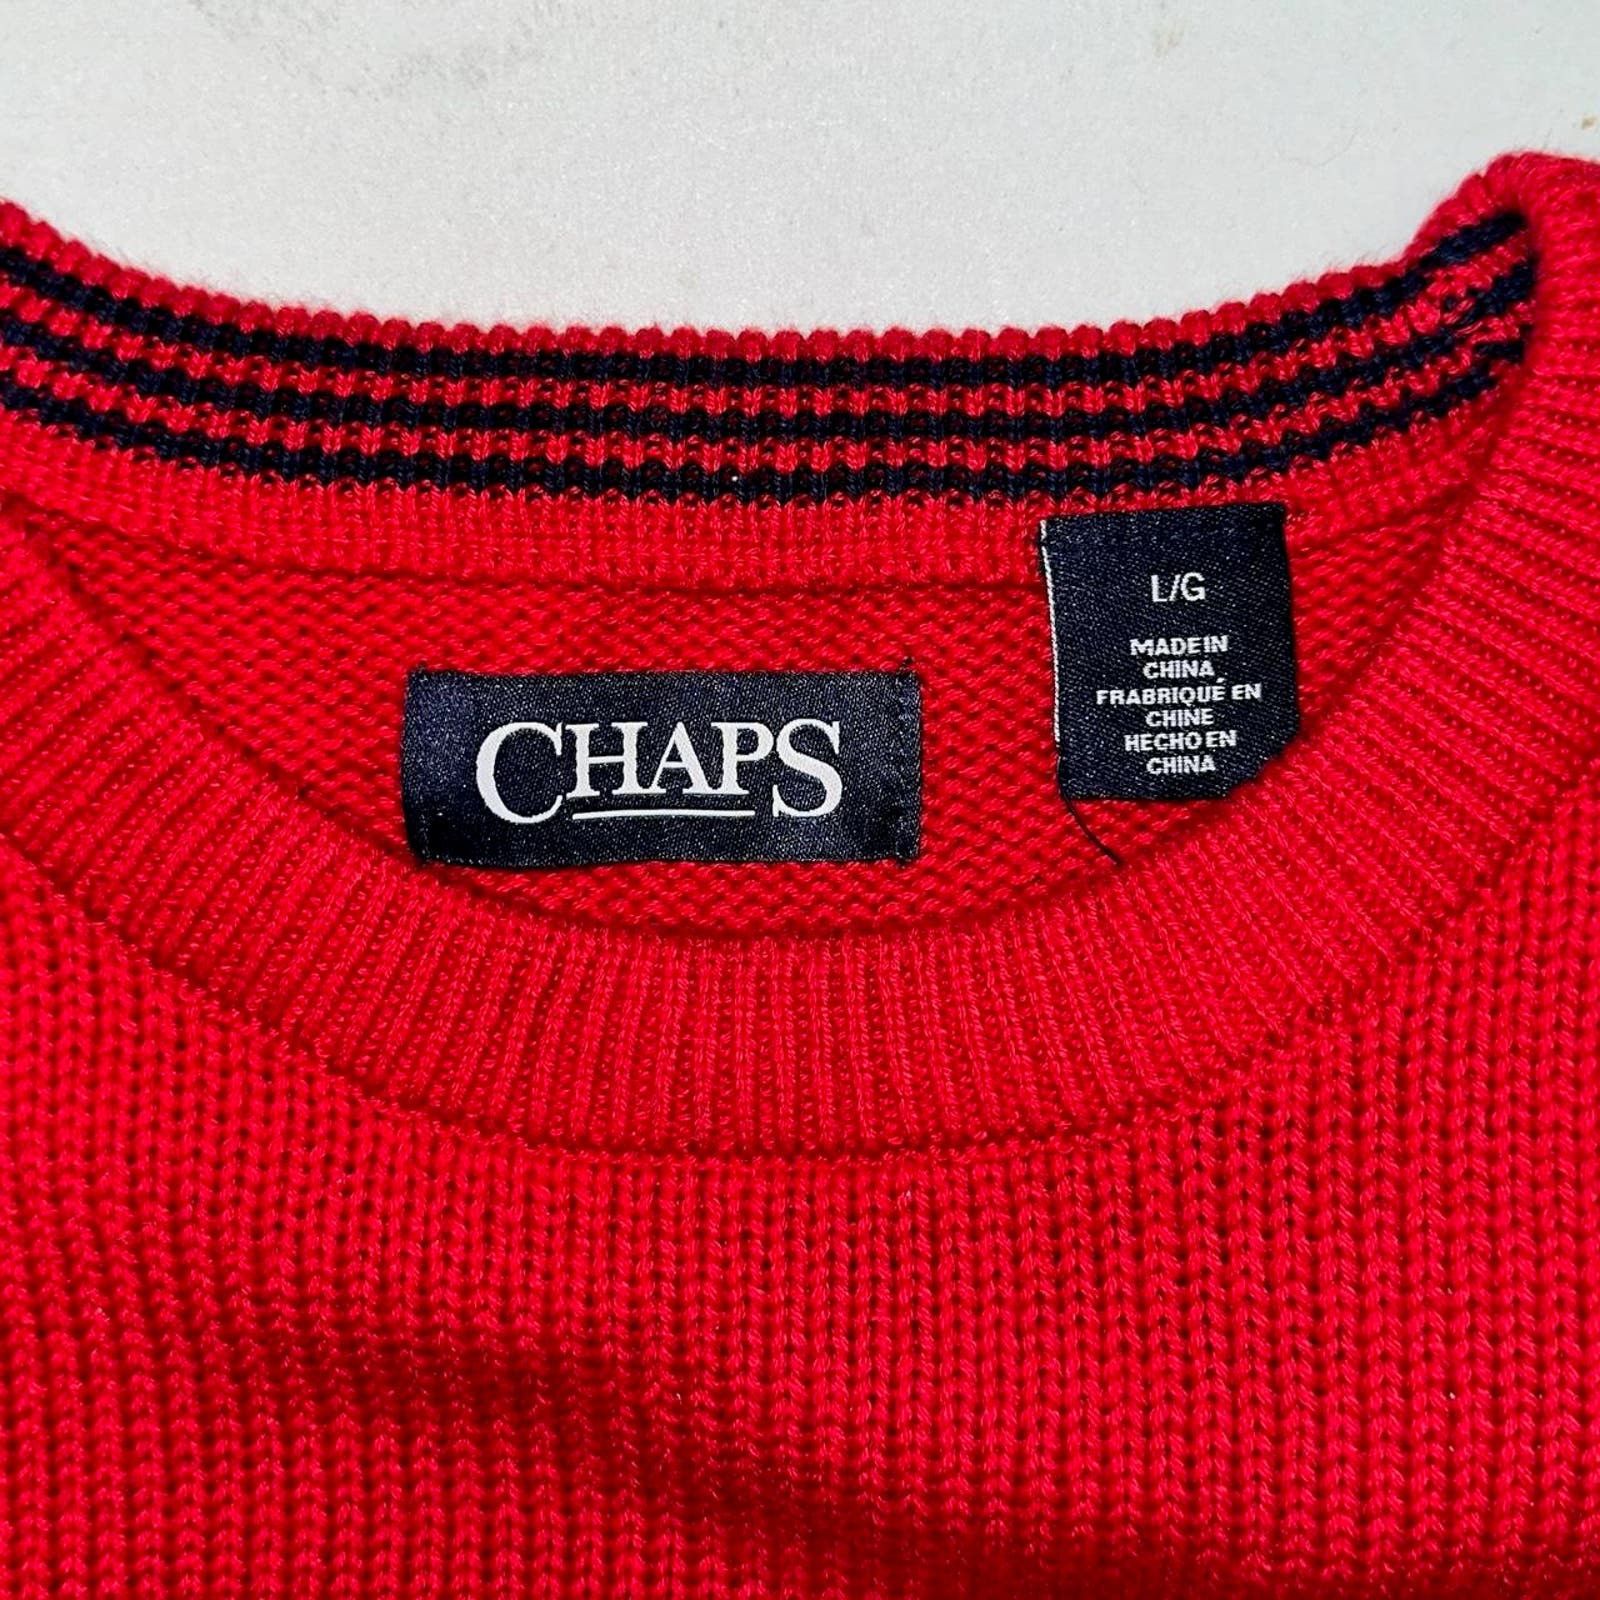 Chaps Vintage 1990’s Chaps Red Knitted Crewneck Sweater Mens Large Size US L / EU 52-54 / 3 - 3 Thumbnail